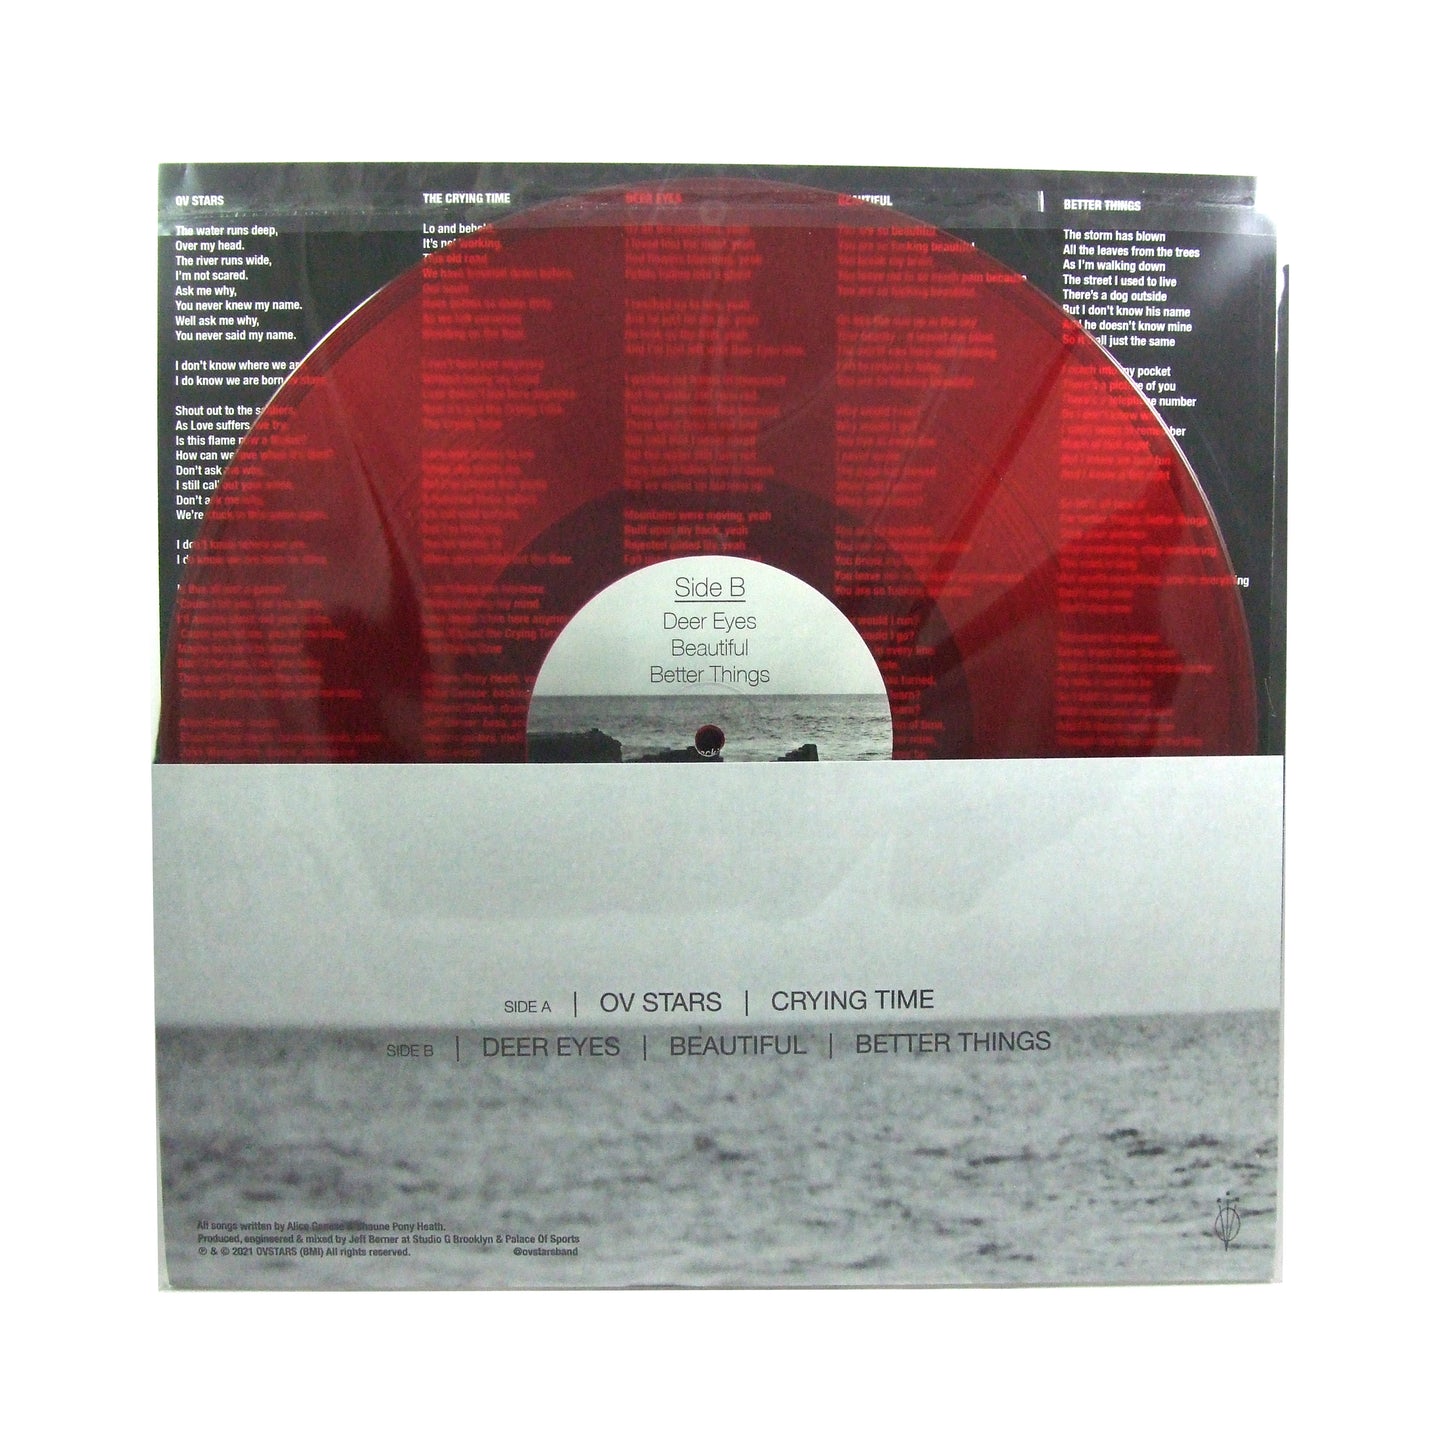 TUESDAYS - by Ov Stars -  Limited Edition Translucent Ruby Red Vinyl EP